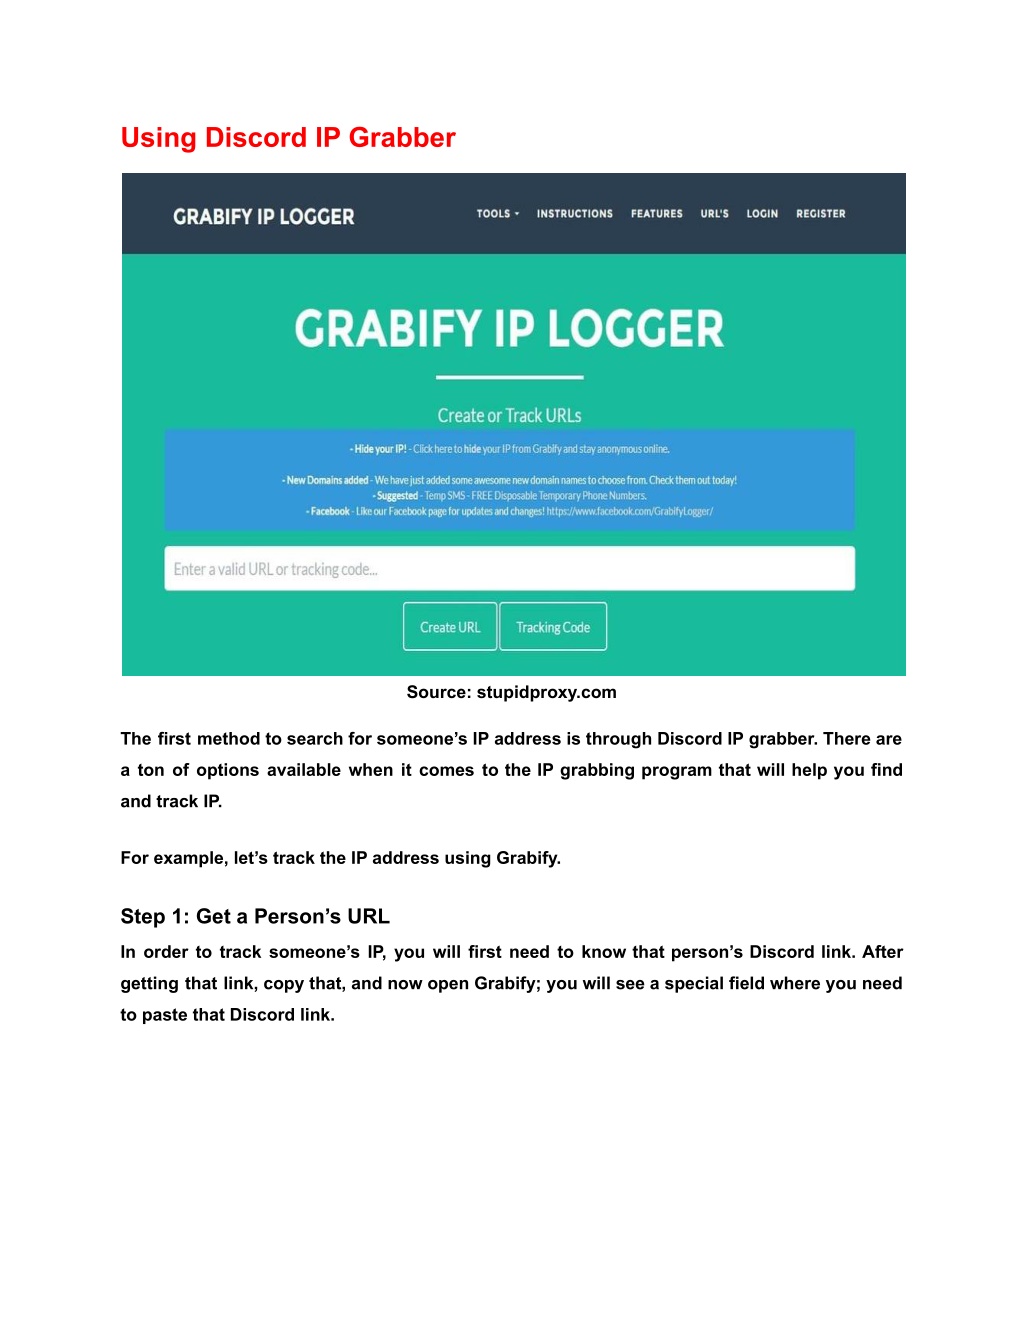 ip grabber site for discord